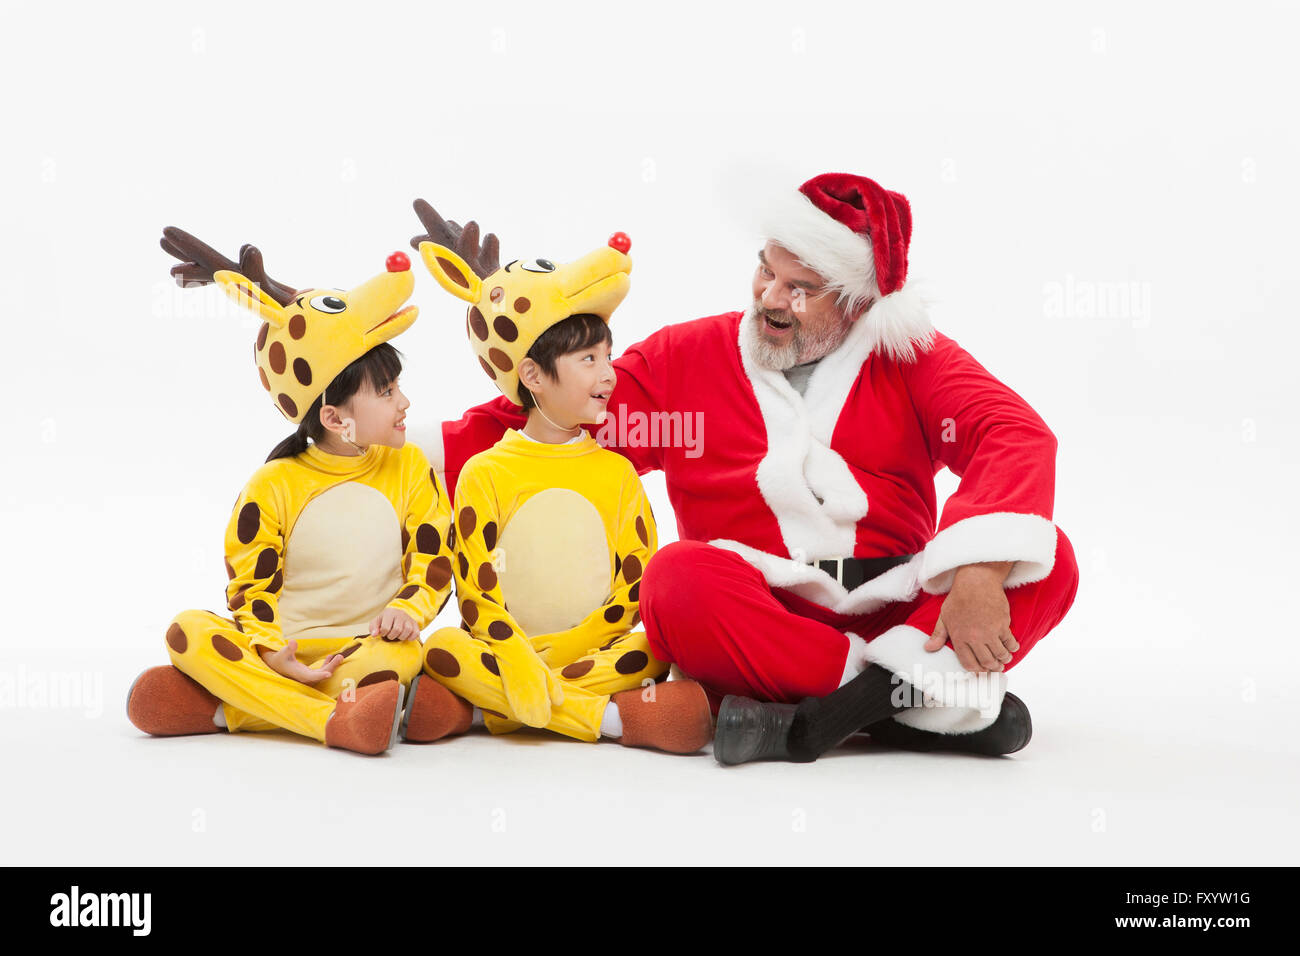 Smiling children dressed like deer and Santa Claus sitting down face to face Stock Photo